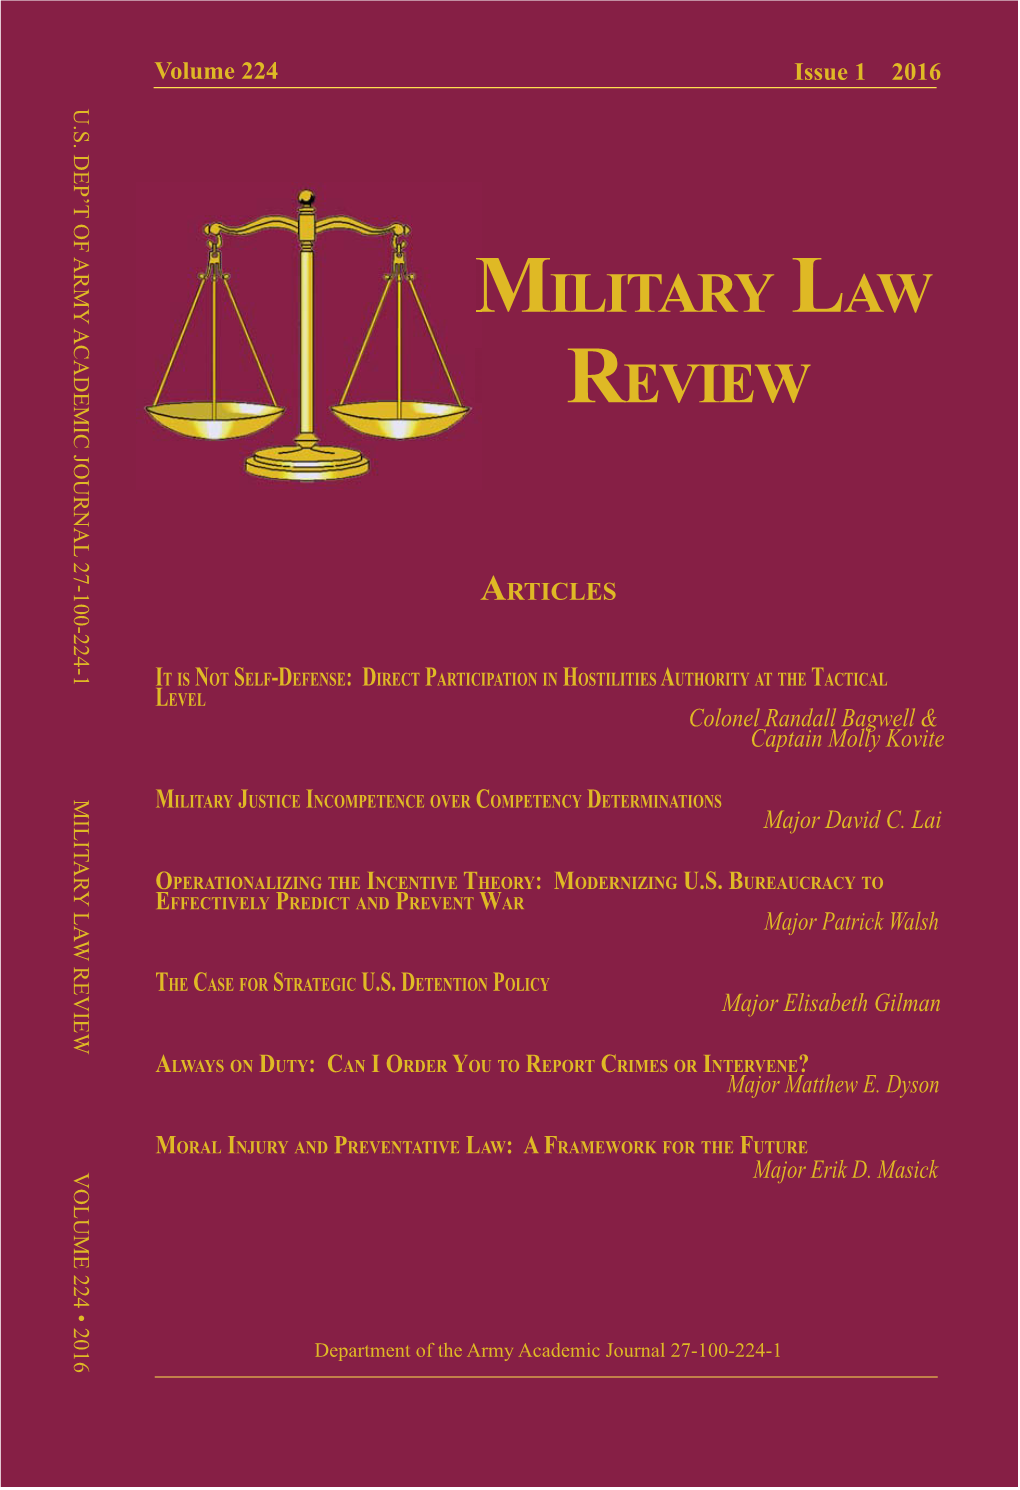 Military Law Review, Volume 224, Issue 1, 2016